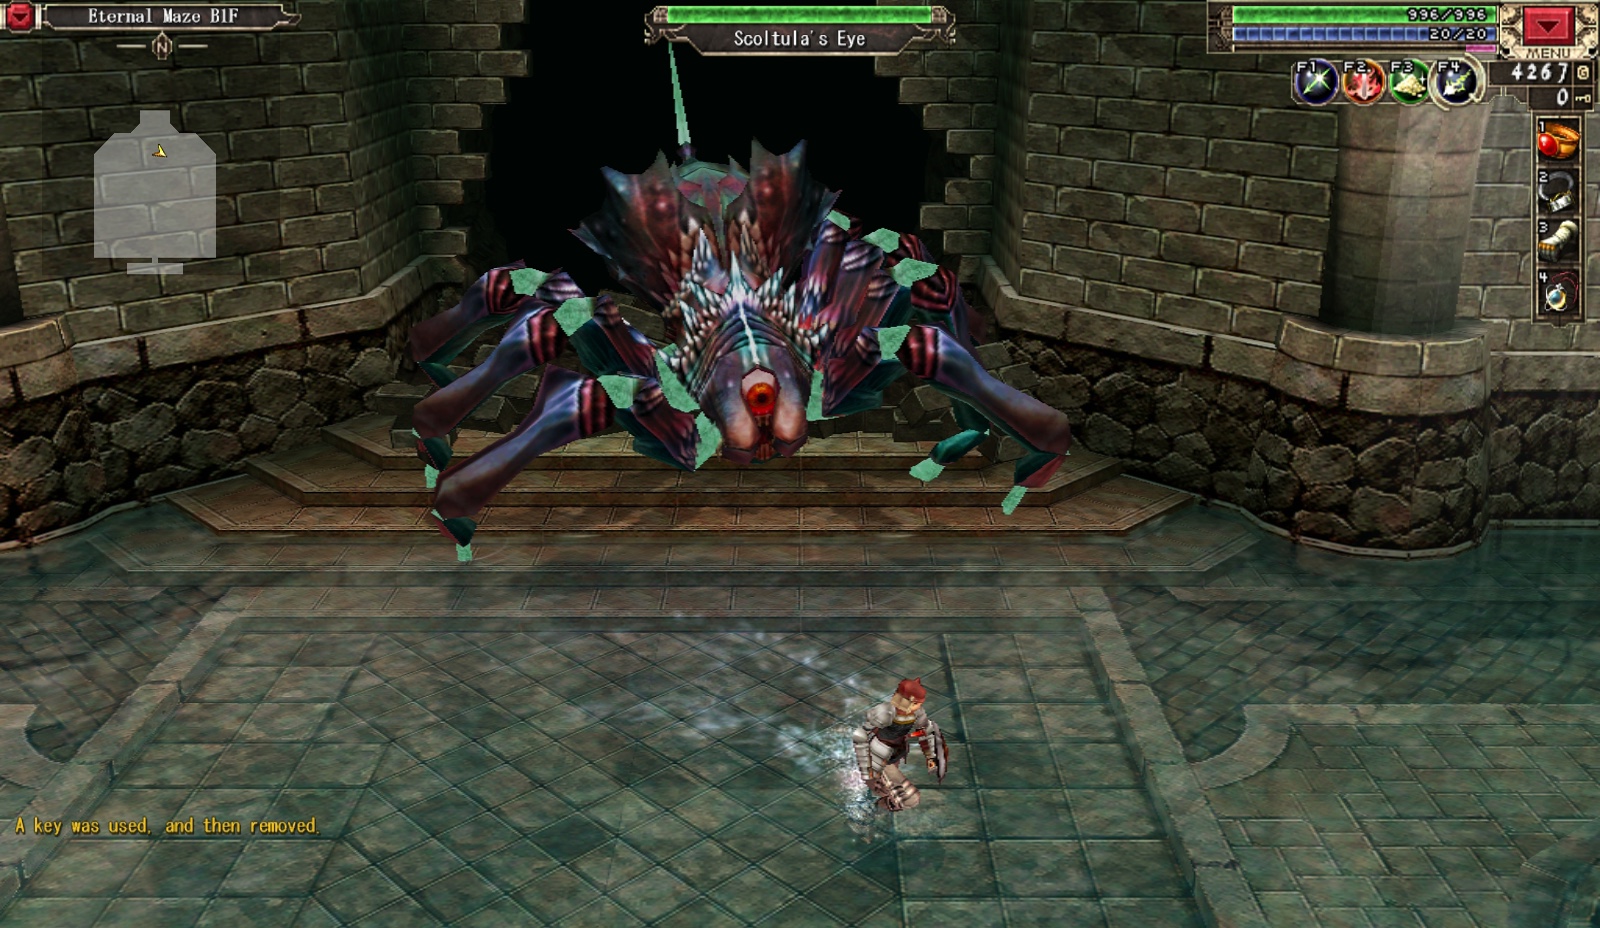 Screenshot From Xanadu Next From Nihon Falcom Featuring A Giant Enemy Spider